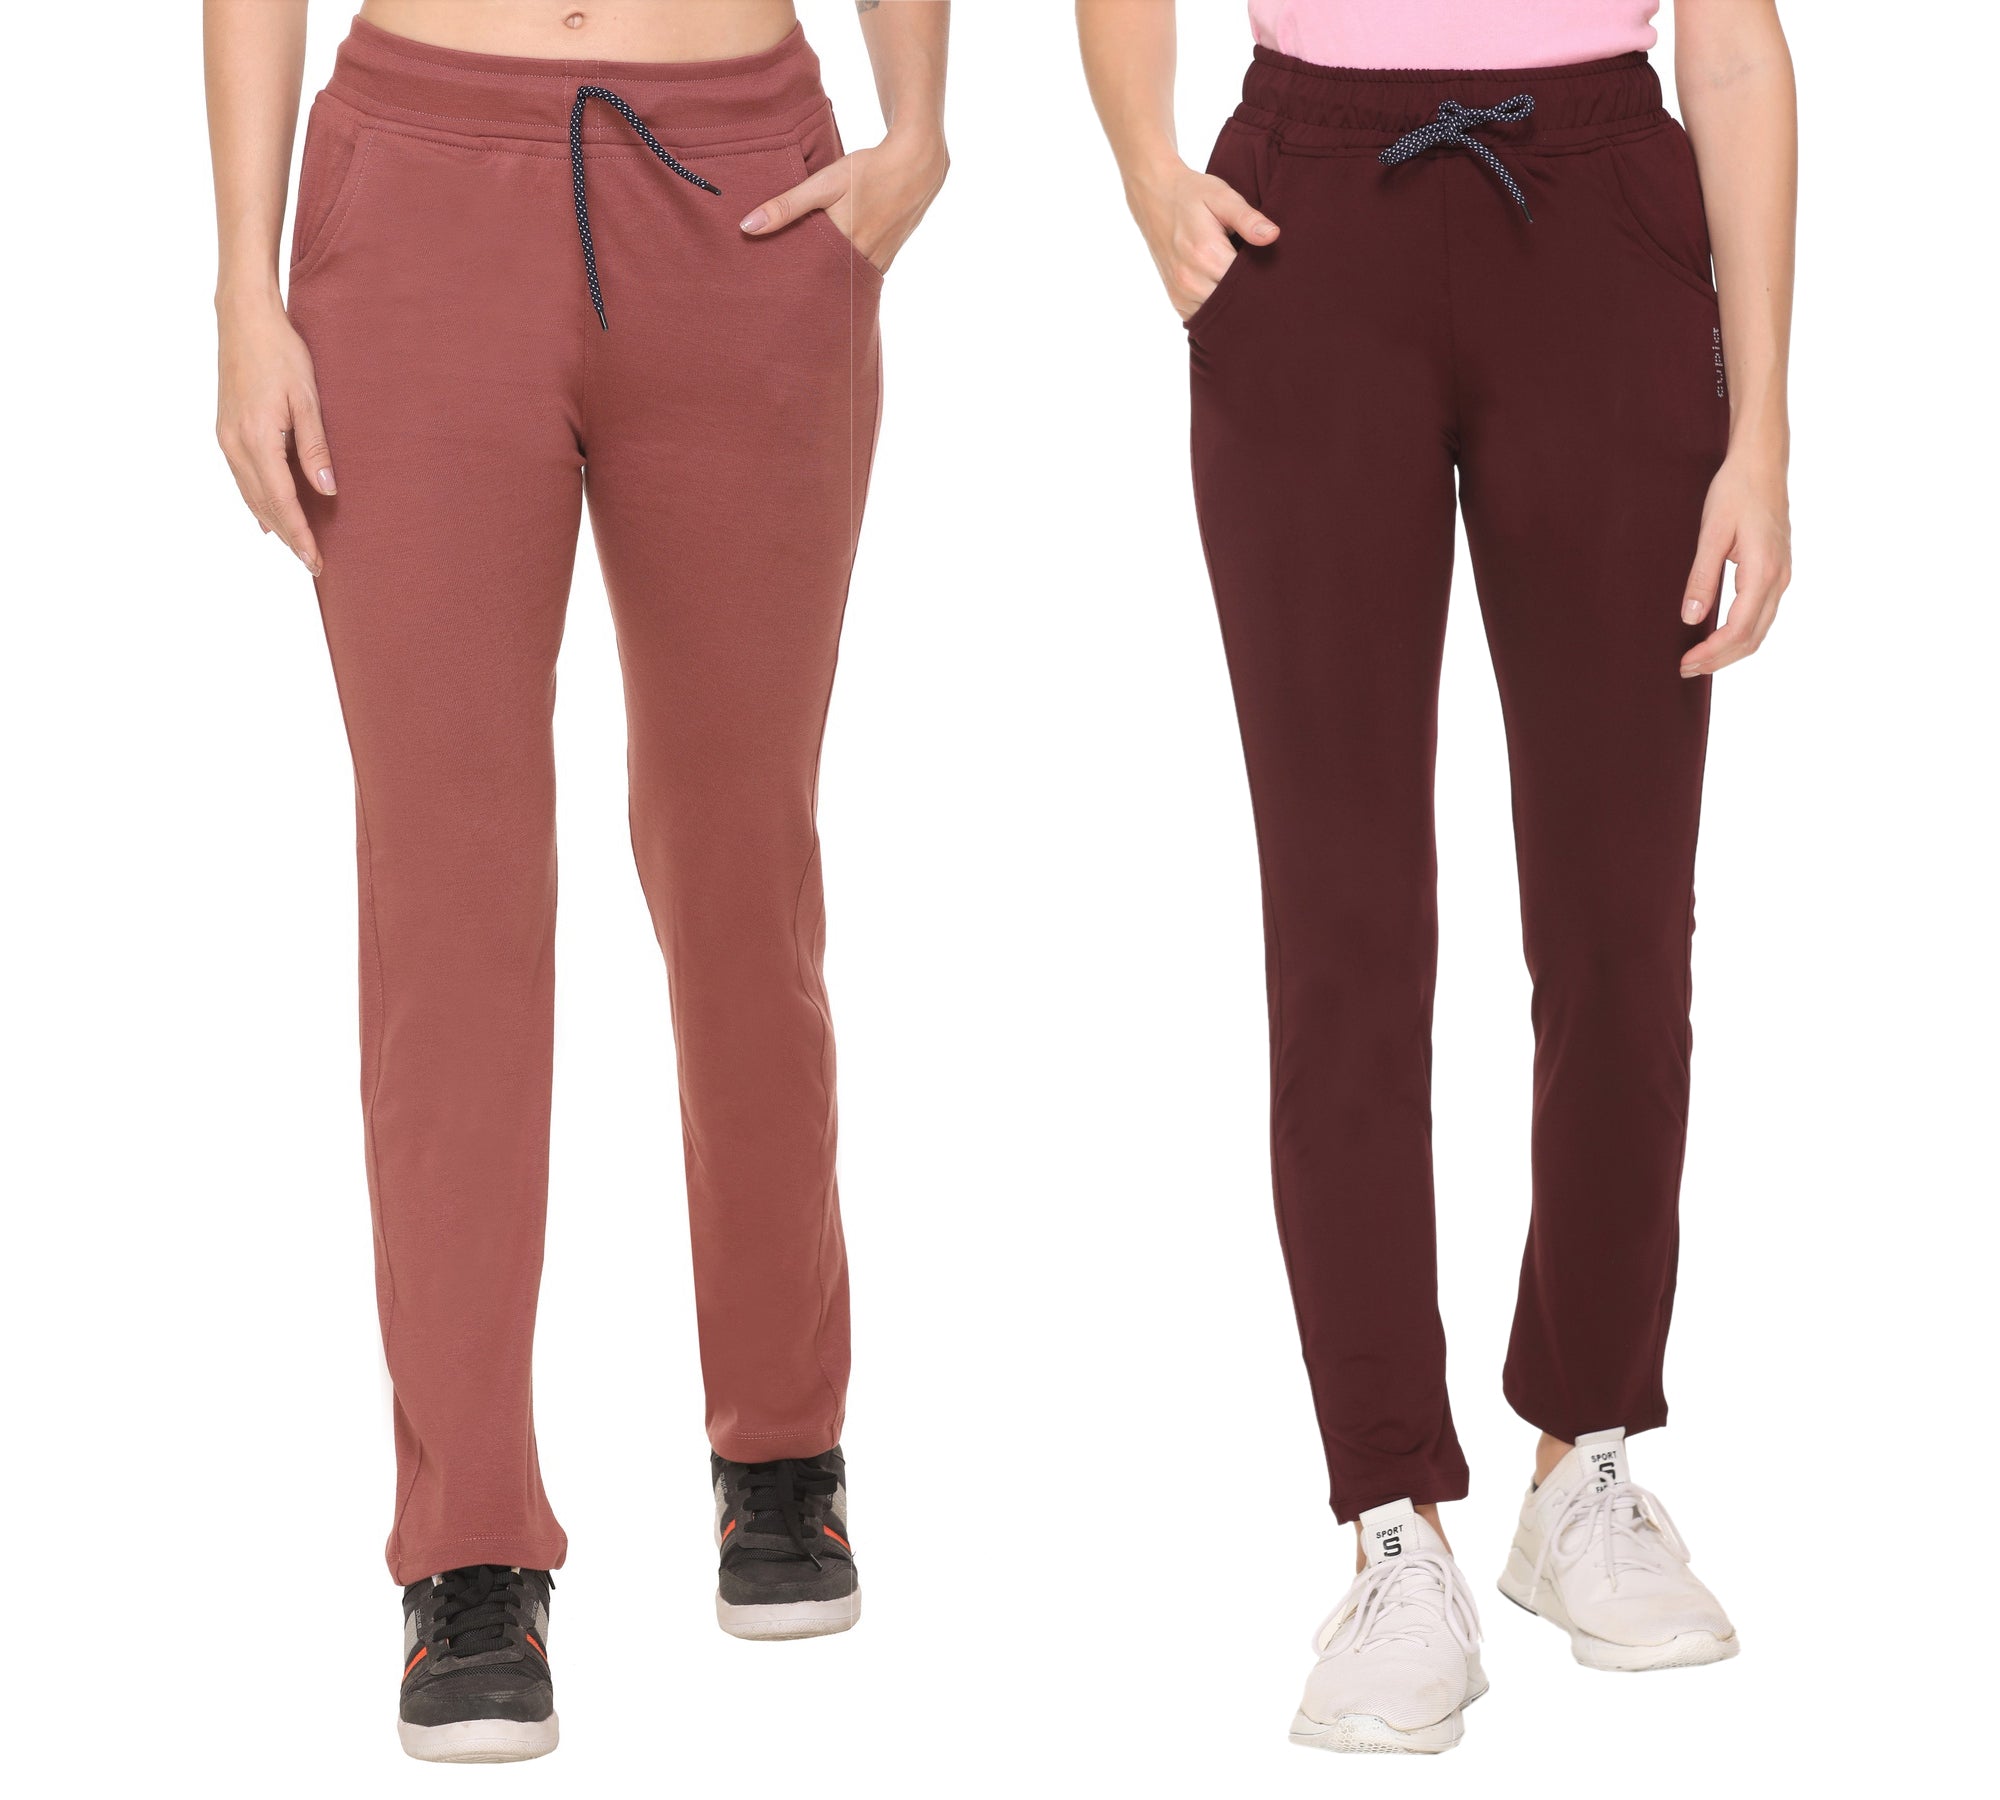 Men's Mix Color Track Pants And T-Shirt Combo